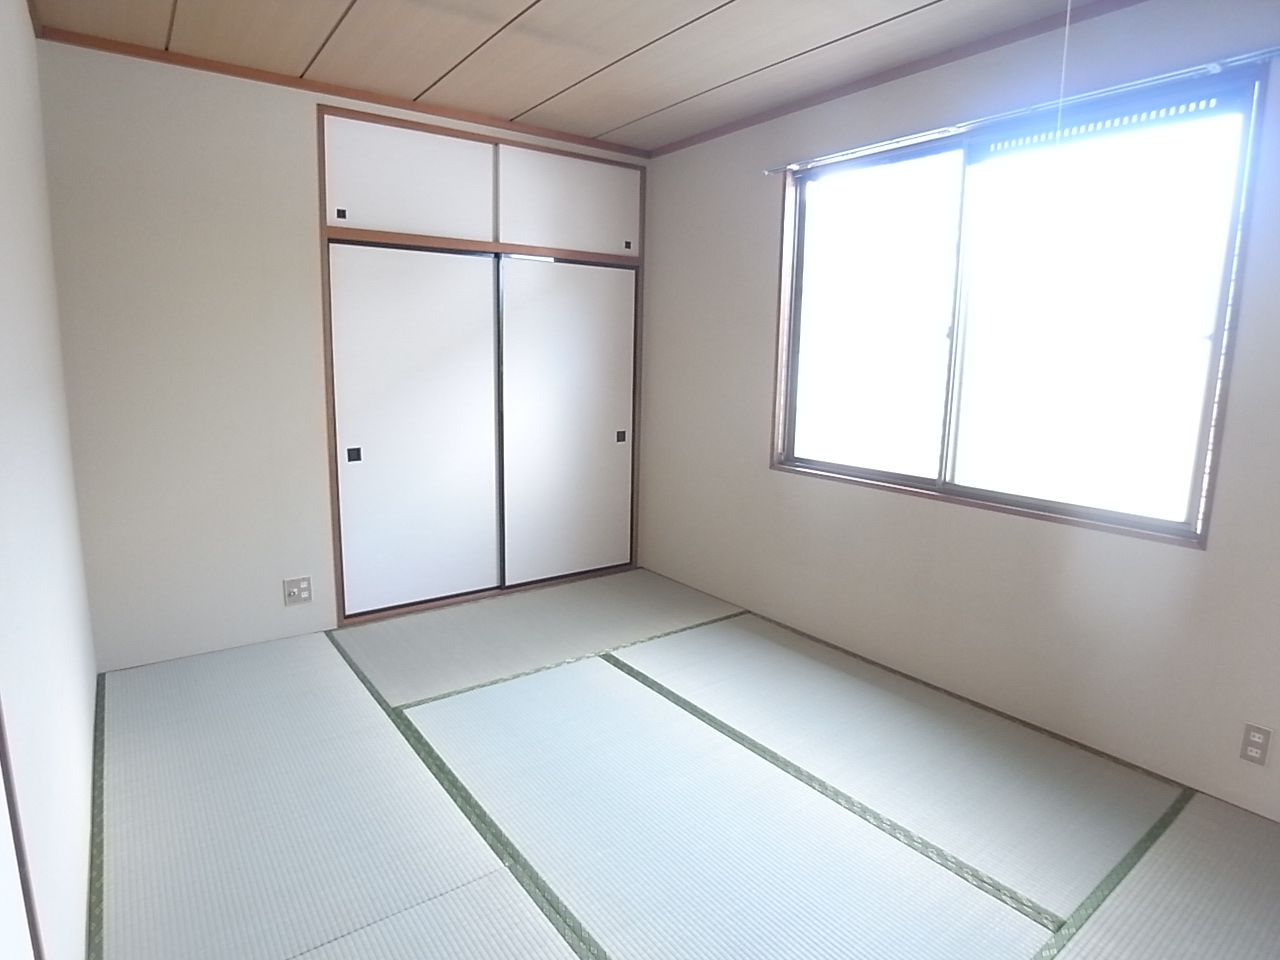 Other room space. Second floor north side Japanese-style room (6 quires)